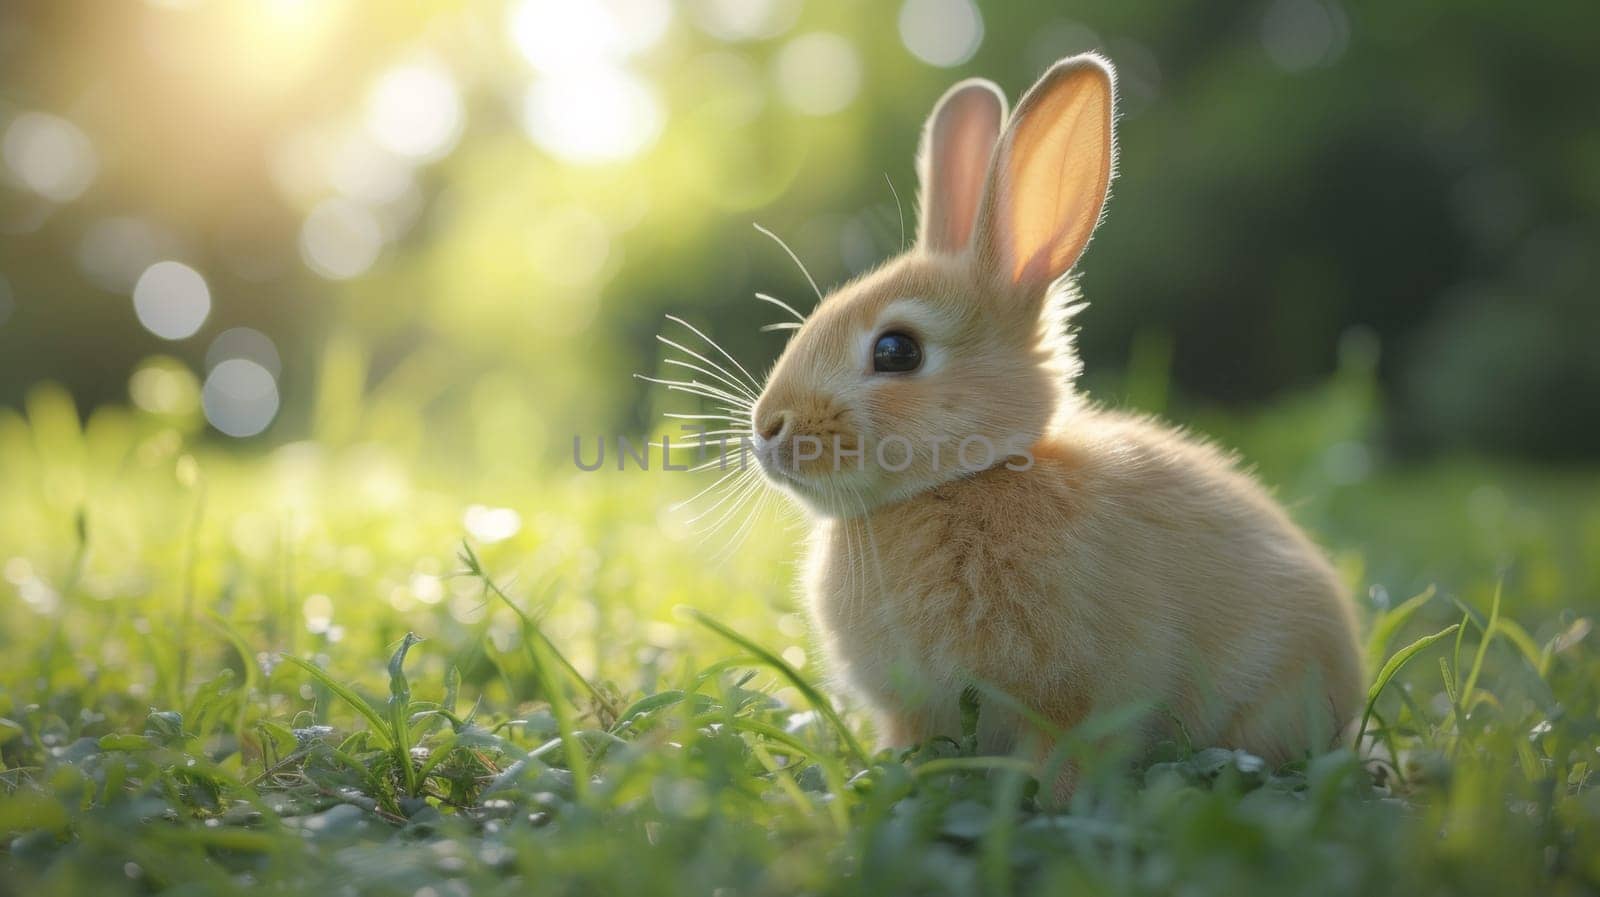 A small rabbit sitting in the grass with sunlight shining on it, AI by starush